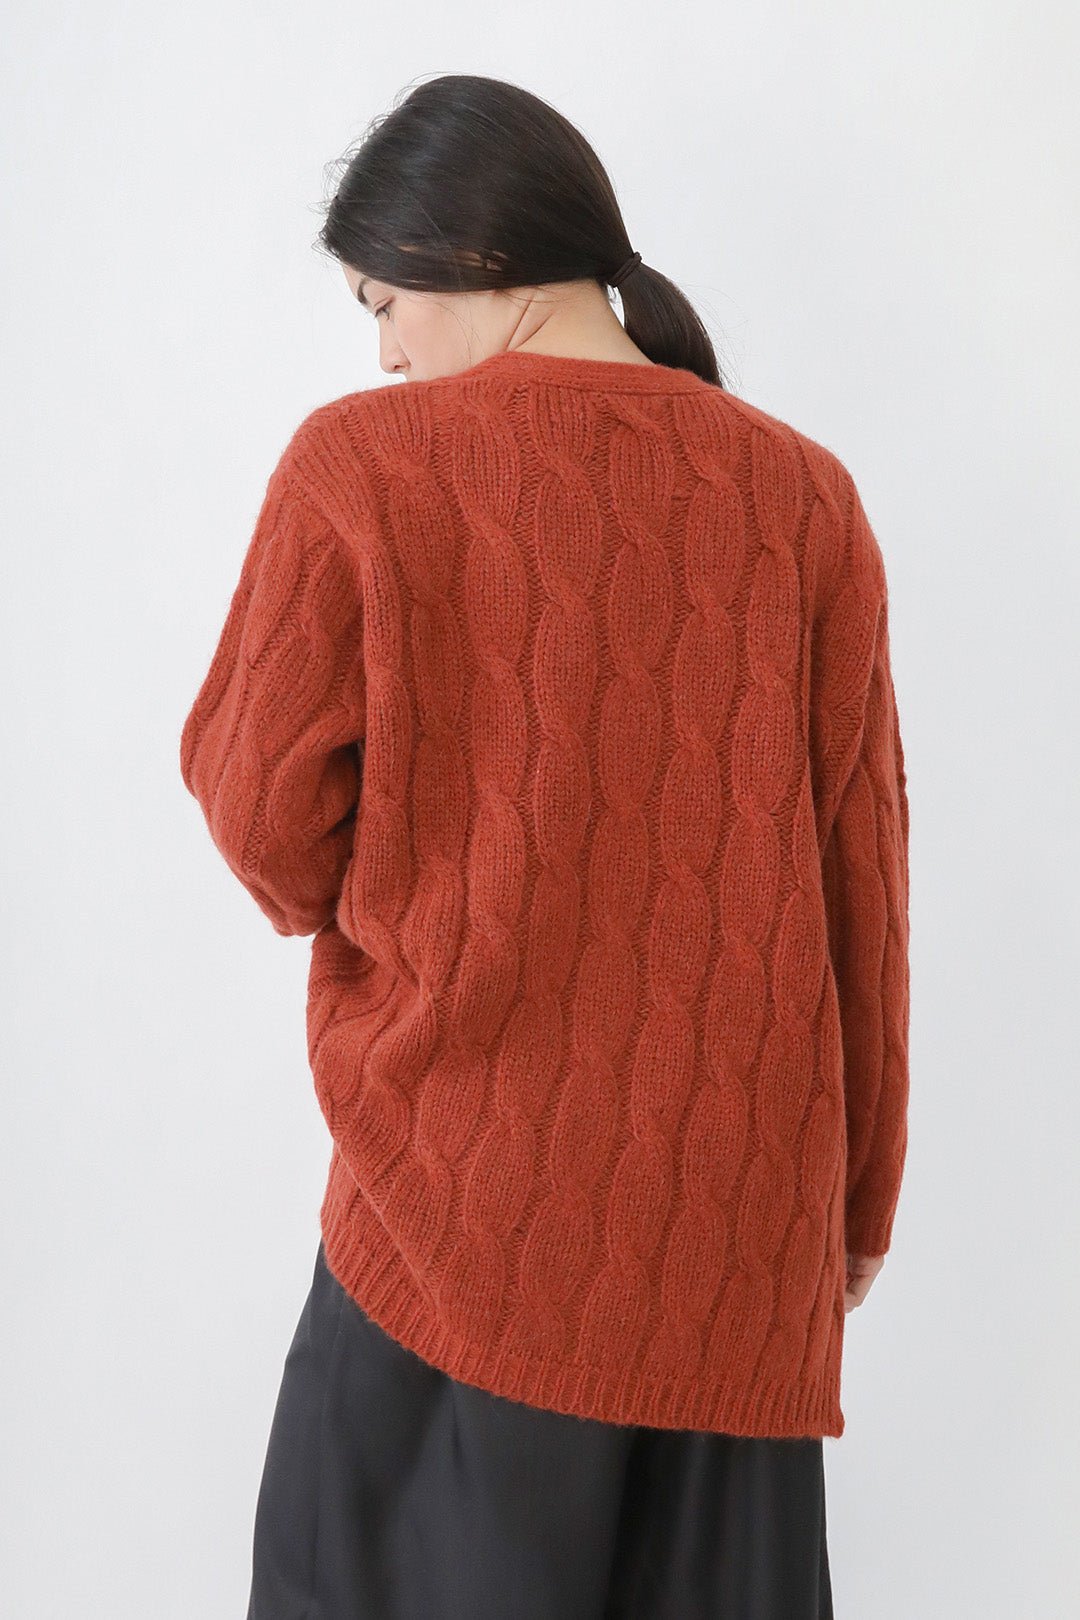 RINNOVA CABLE KNIT CARDIGAN IN BABY ALPACA AND FINE MERINO BLEND - Jarbo